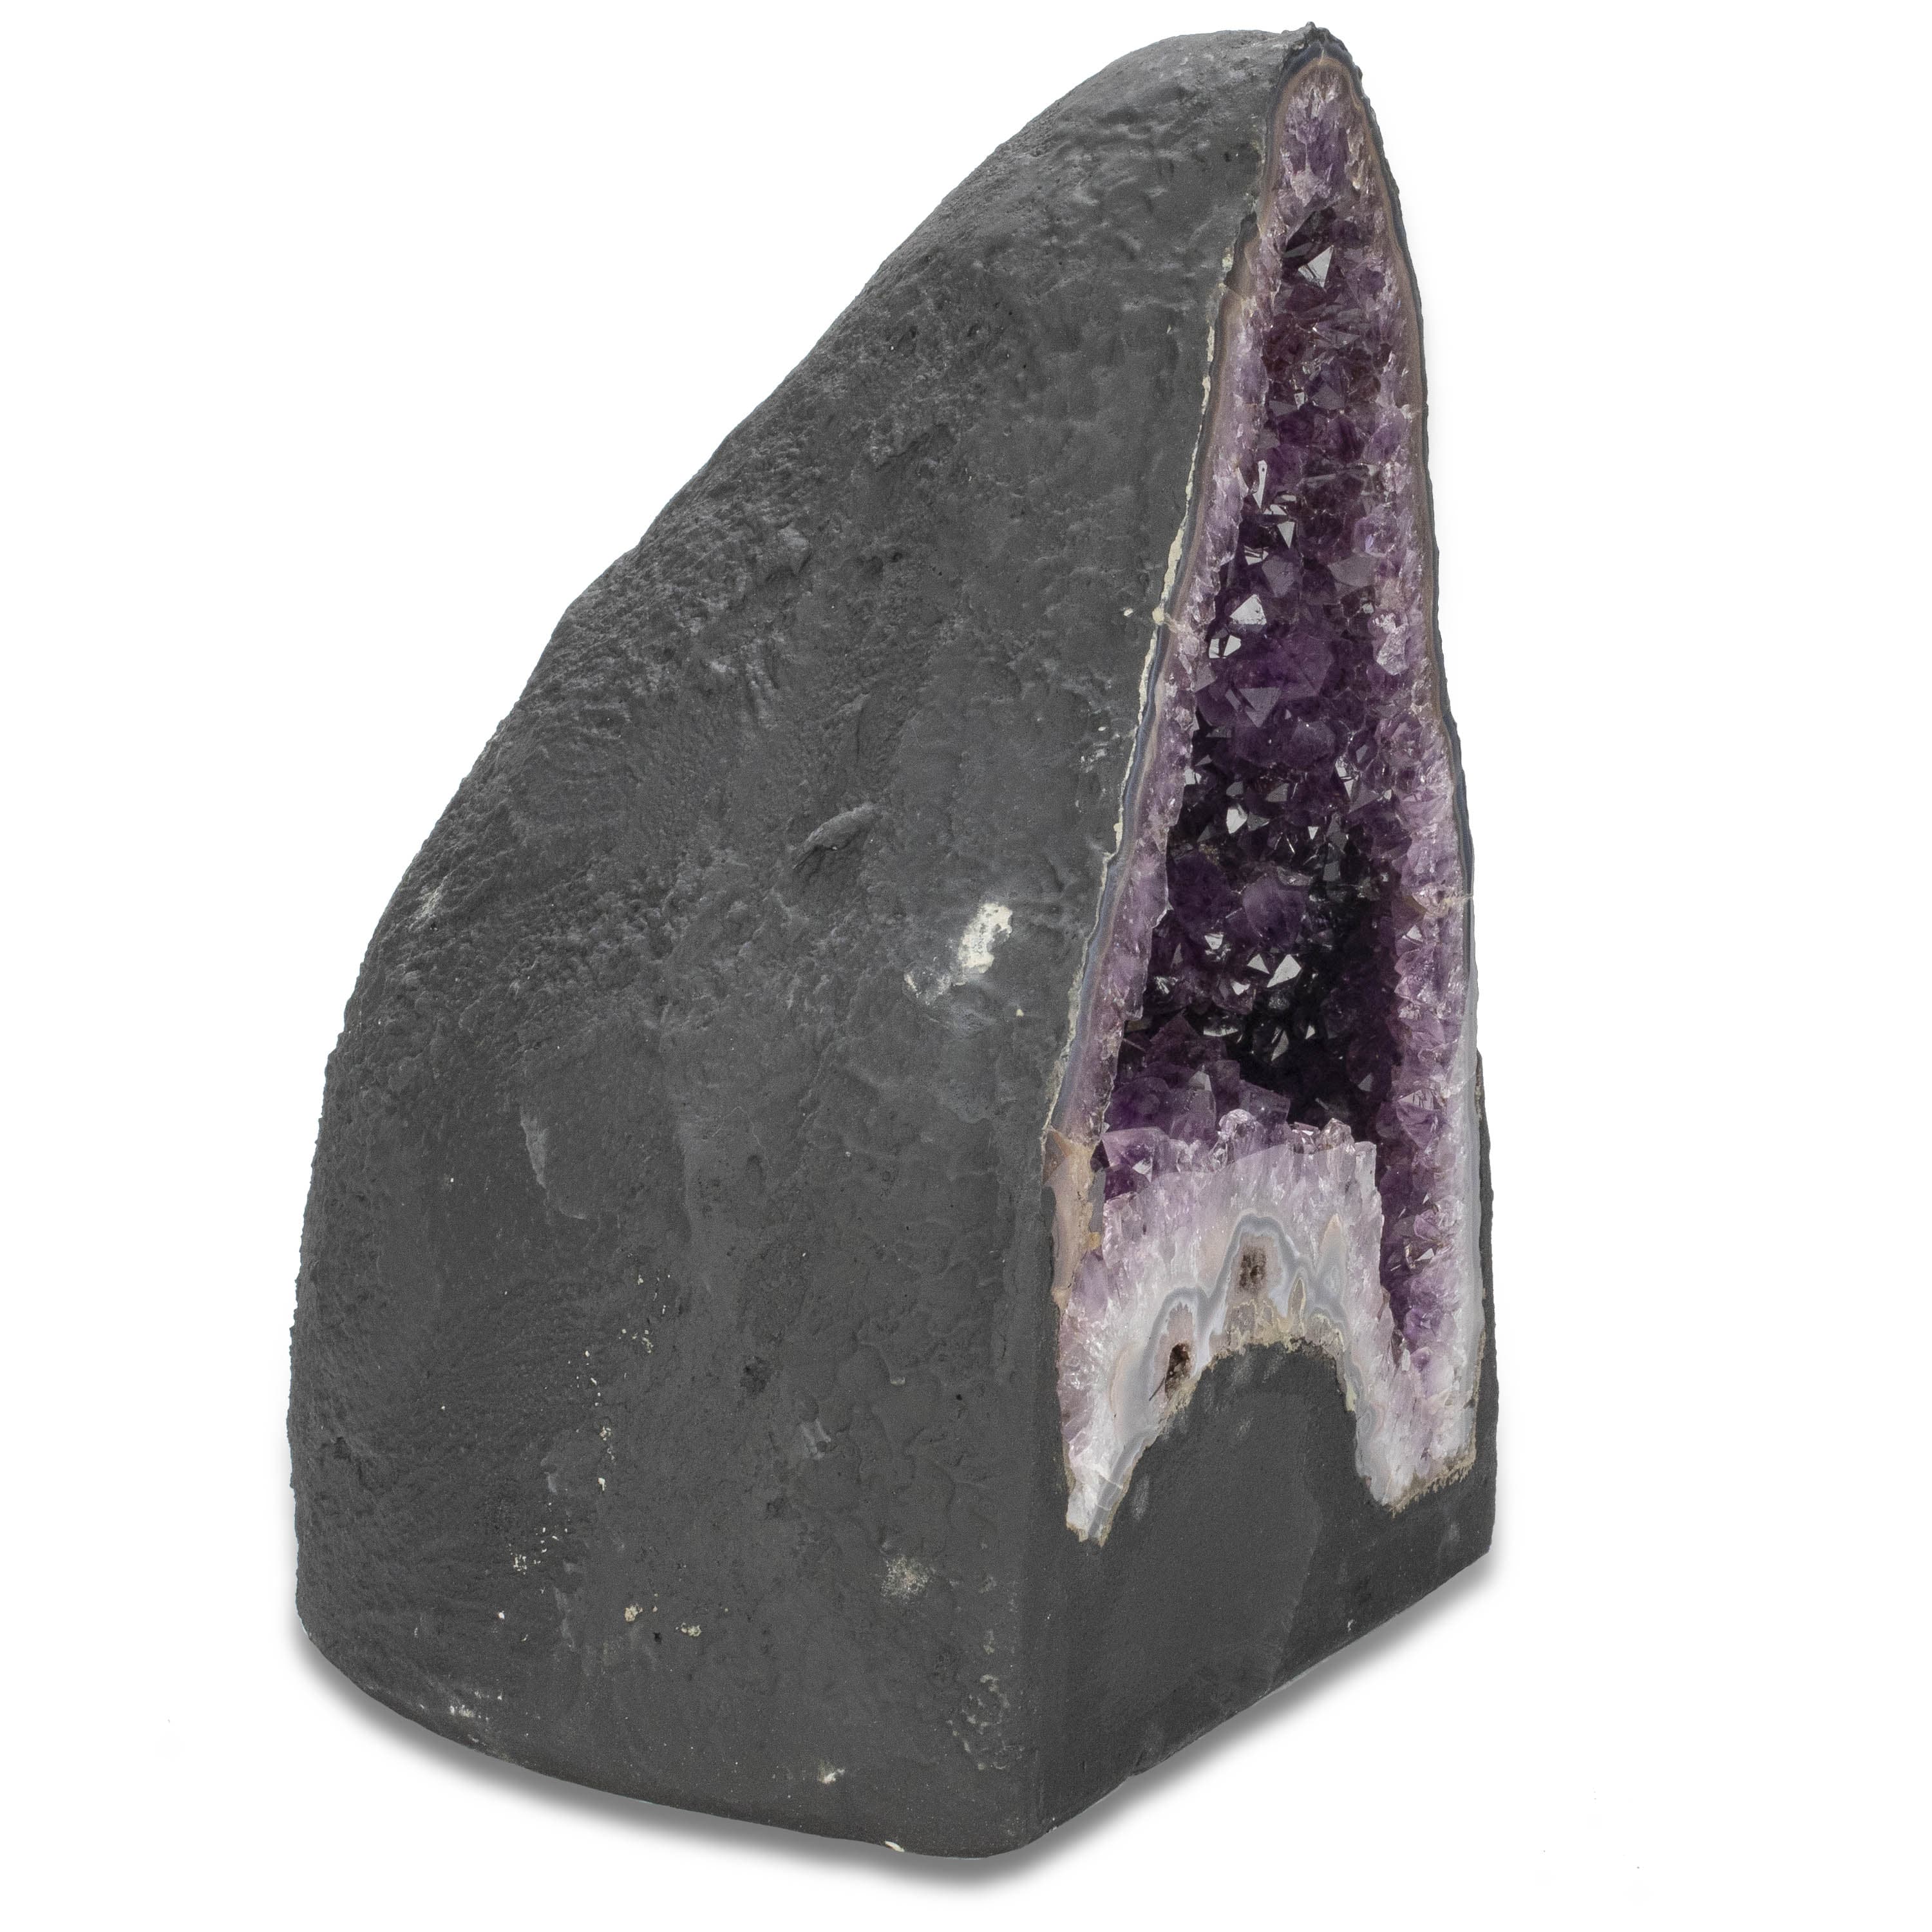 Kalifano Amethyst Amethyst Geode Cathedral - 14" / 40 lbs BAG6400.002